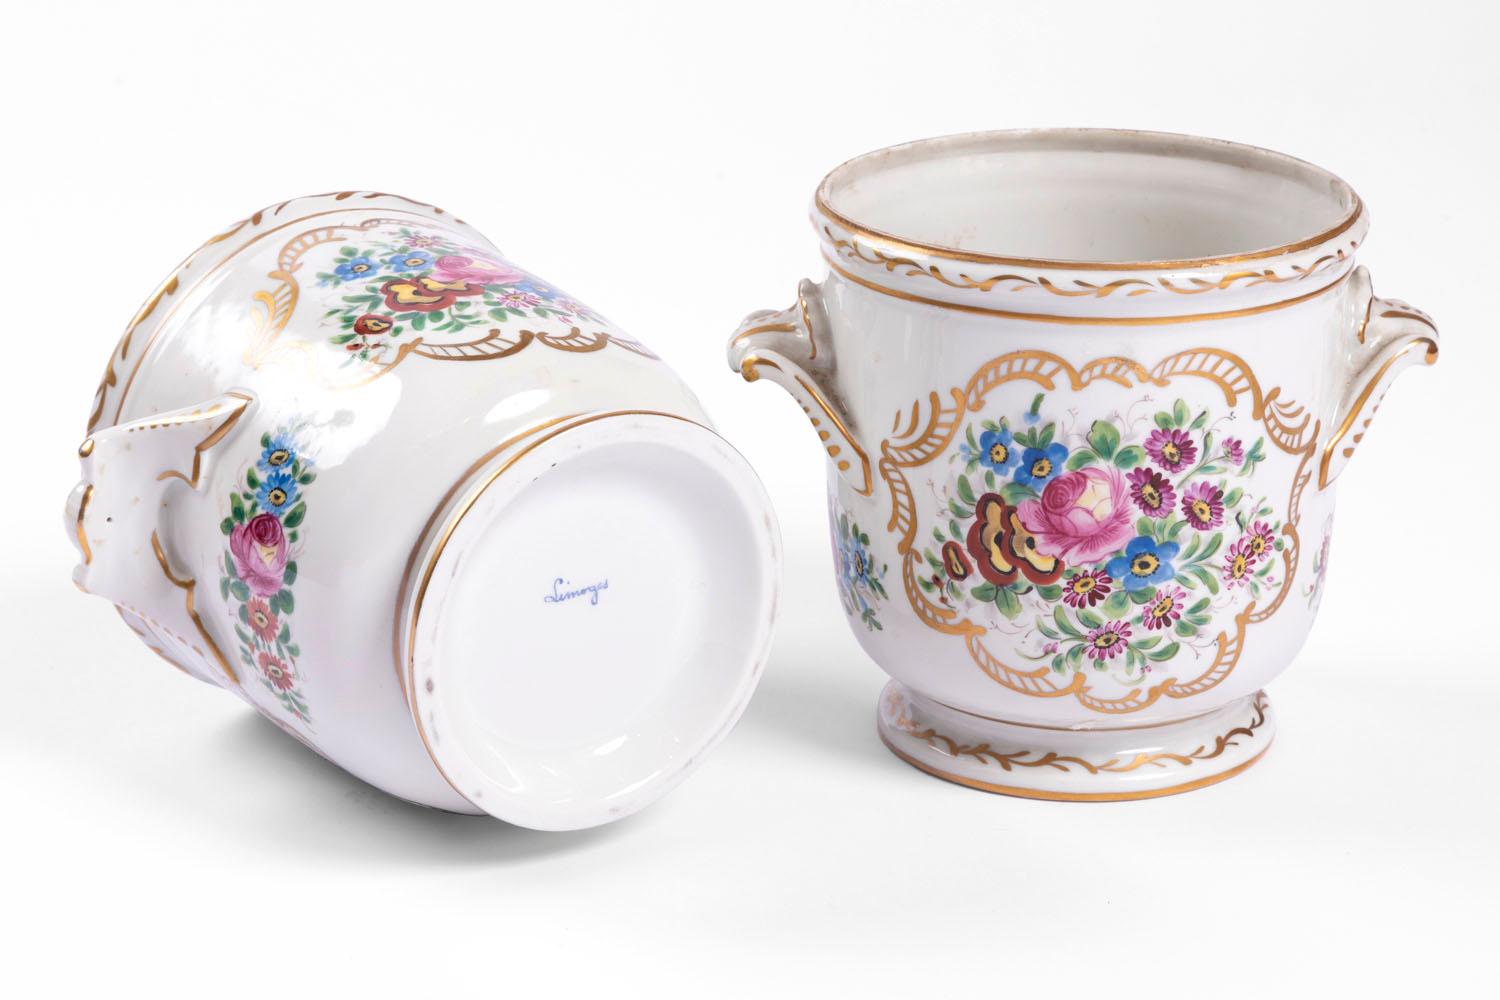 Enameled Pair of Limoges Porcelain Coolers with a Decor of Flowers, Early 20th Century